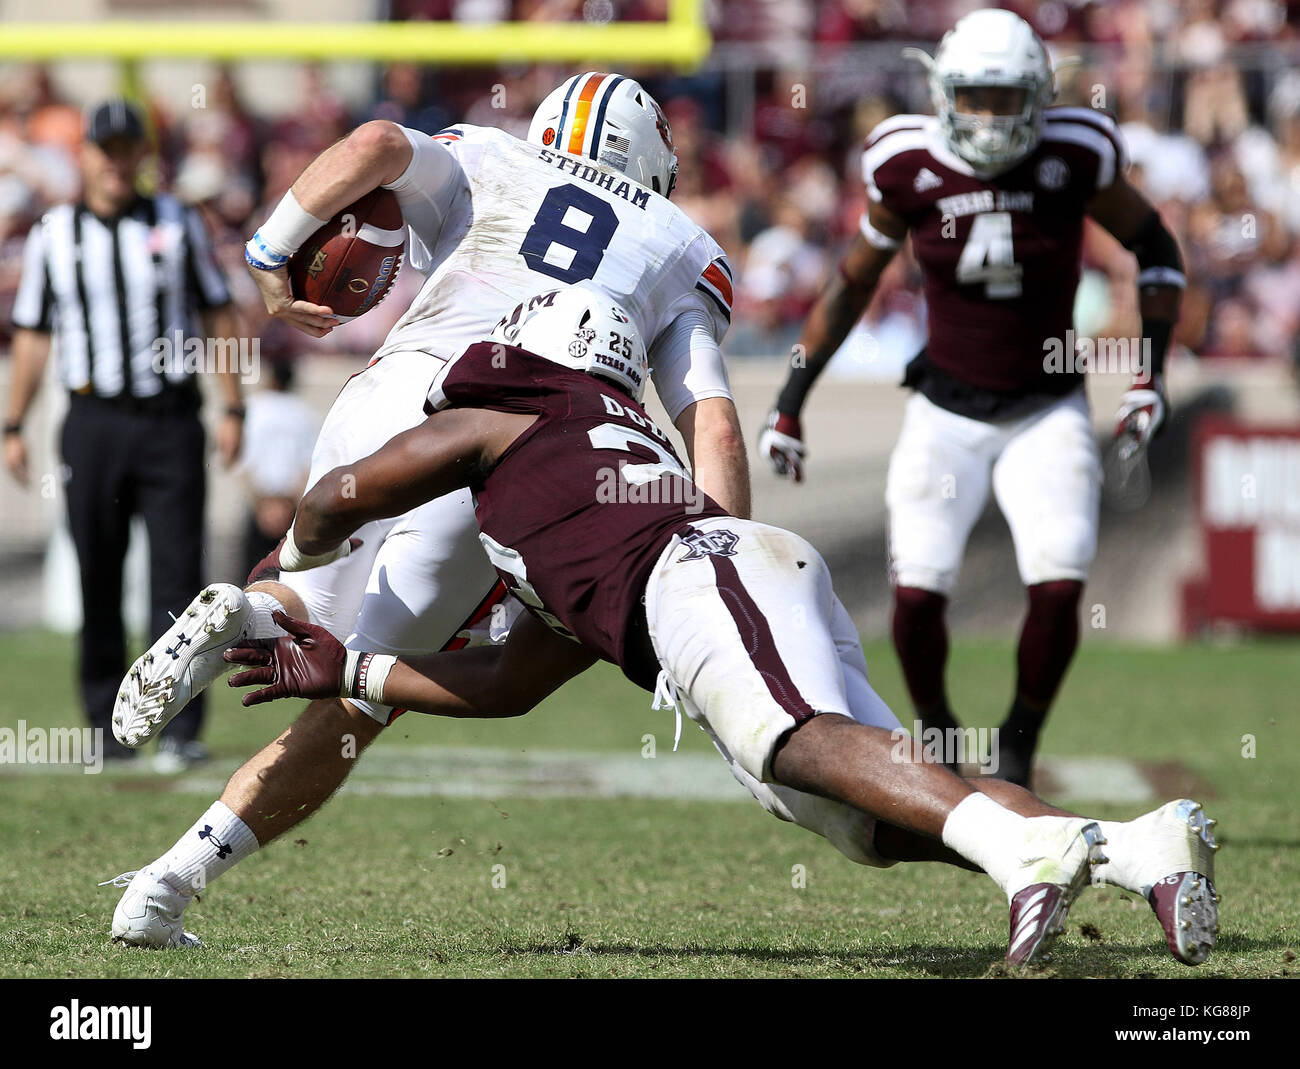 November 4, 2017: Texas A&M Aggies linebacker Tyrel Dodson (25) reaches to tackle Auburn Tigers quarterback Jarrett Stidham (8) in the third quarter during the NCAA football game between the Auburn Tigers and the Texas A&M Aggies at Kyle Field in College Station, TX; John Glaser/CSM. Stock Photo